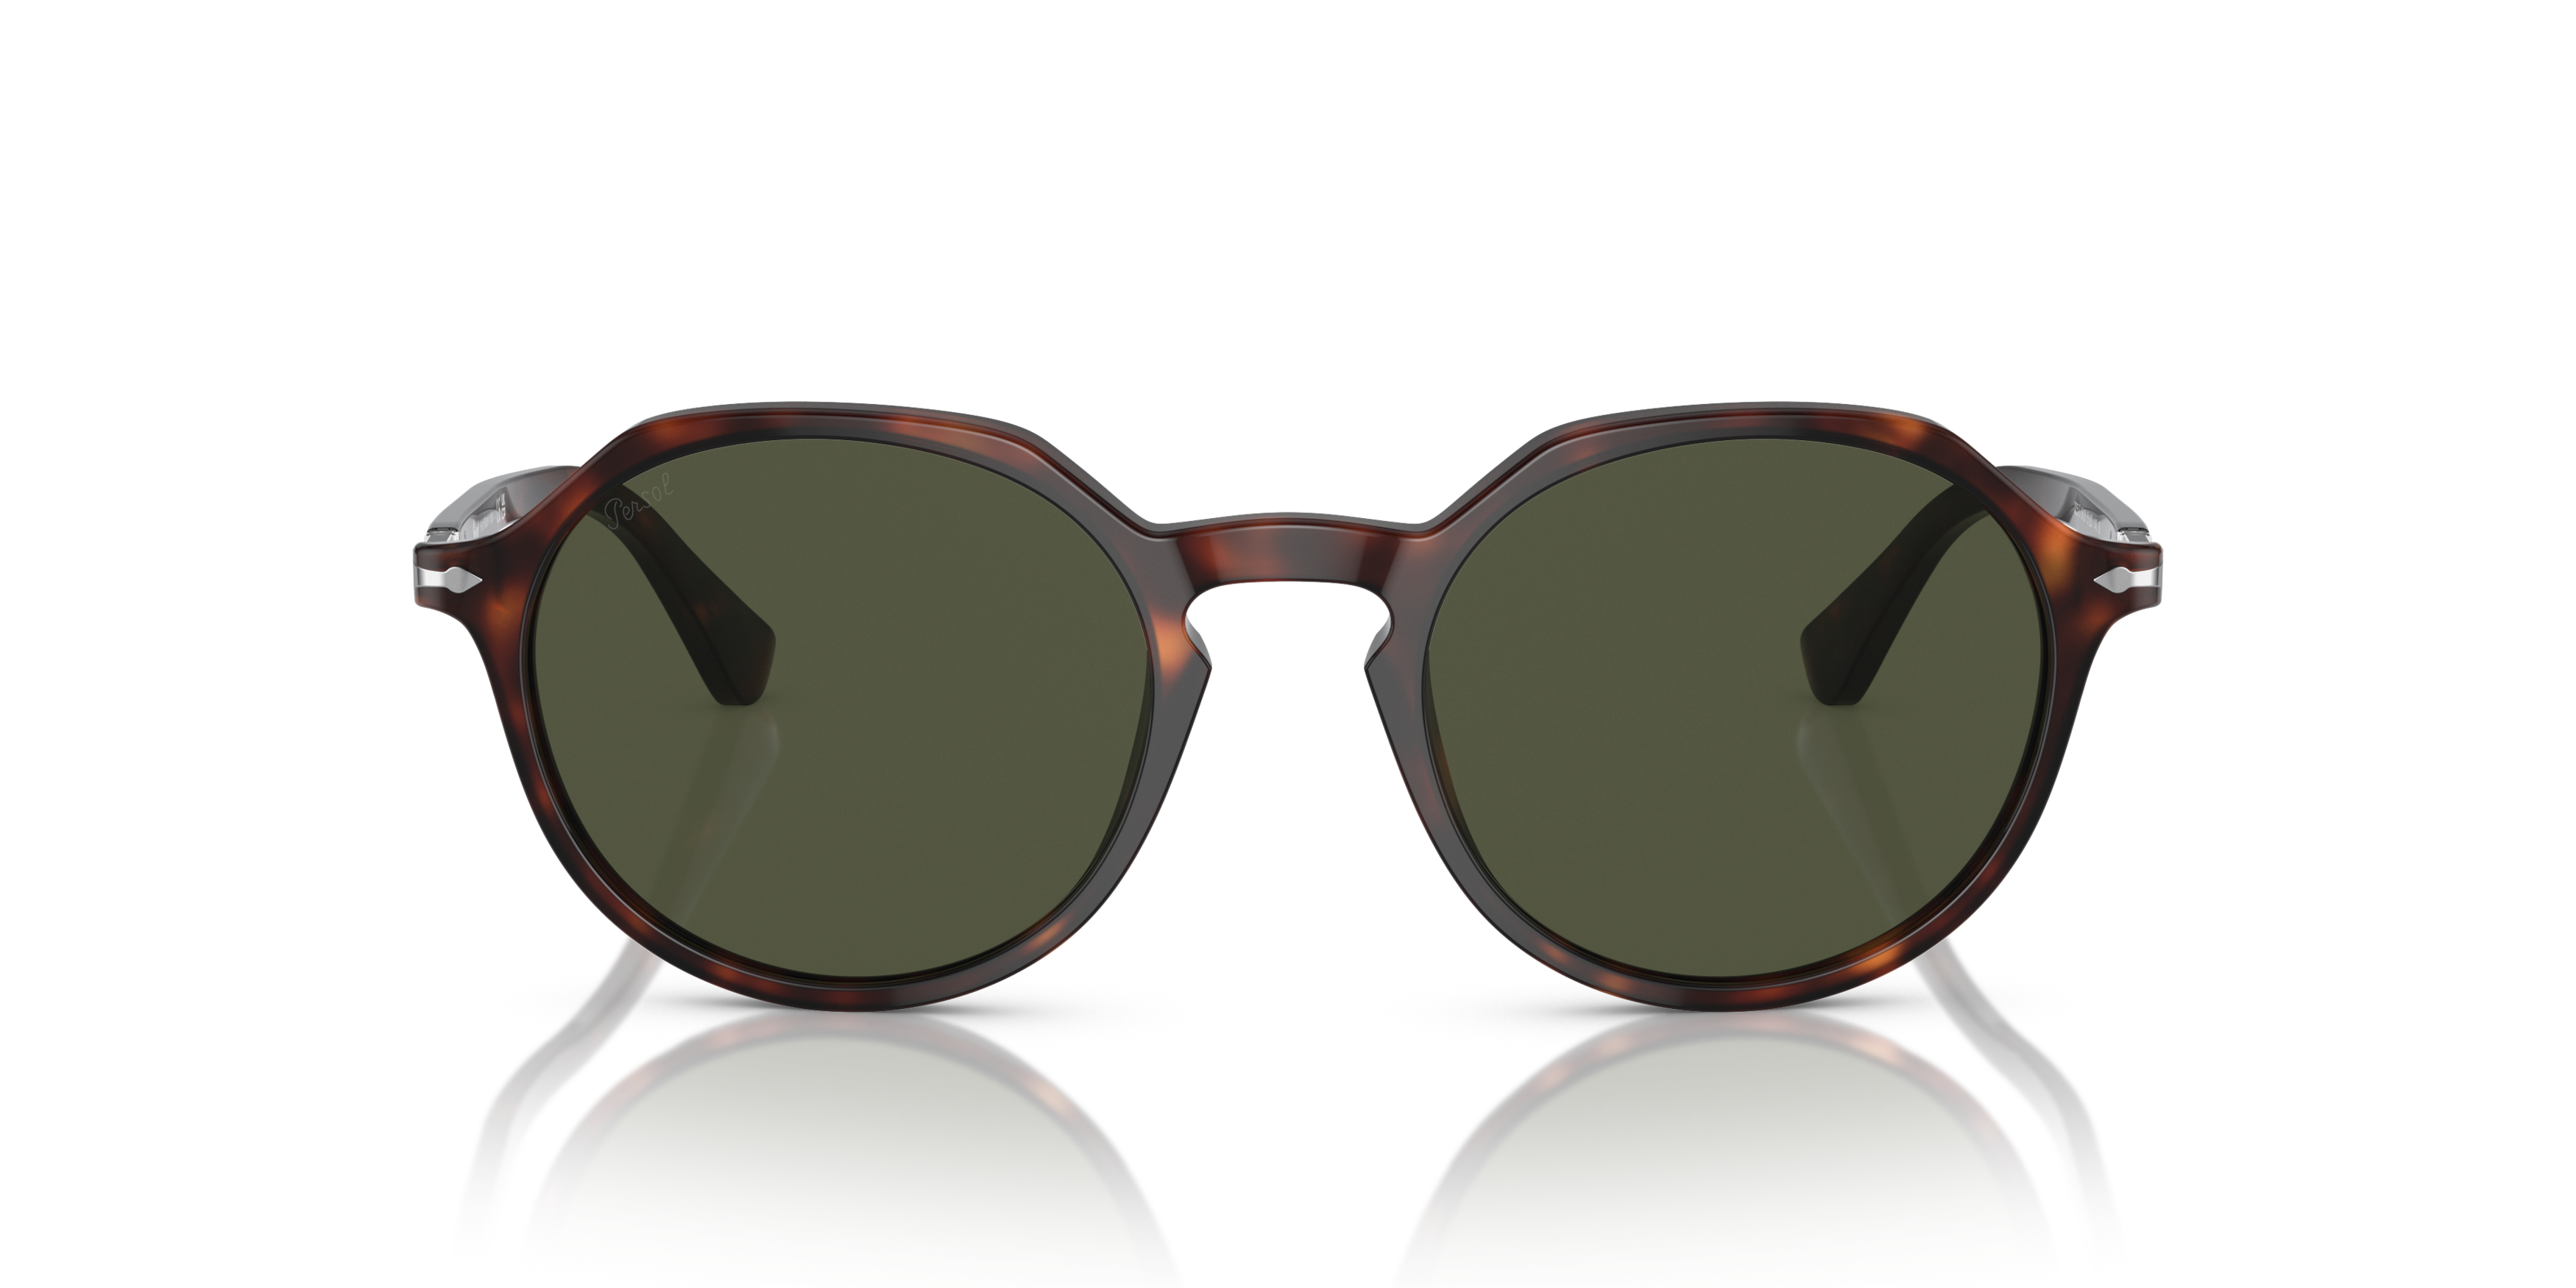 [products.image.front] PERSOL PO3255S 24/31